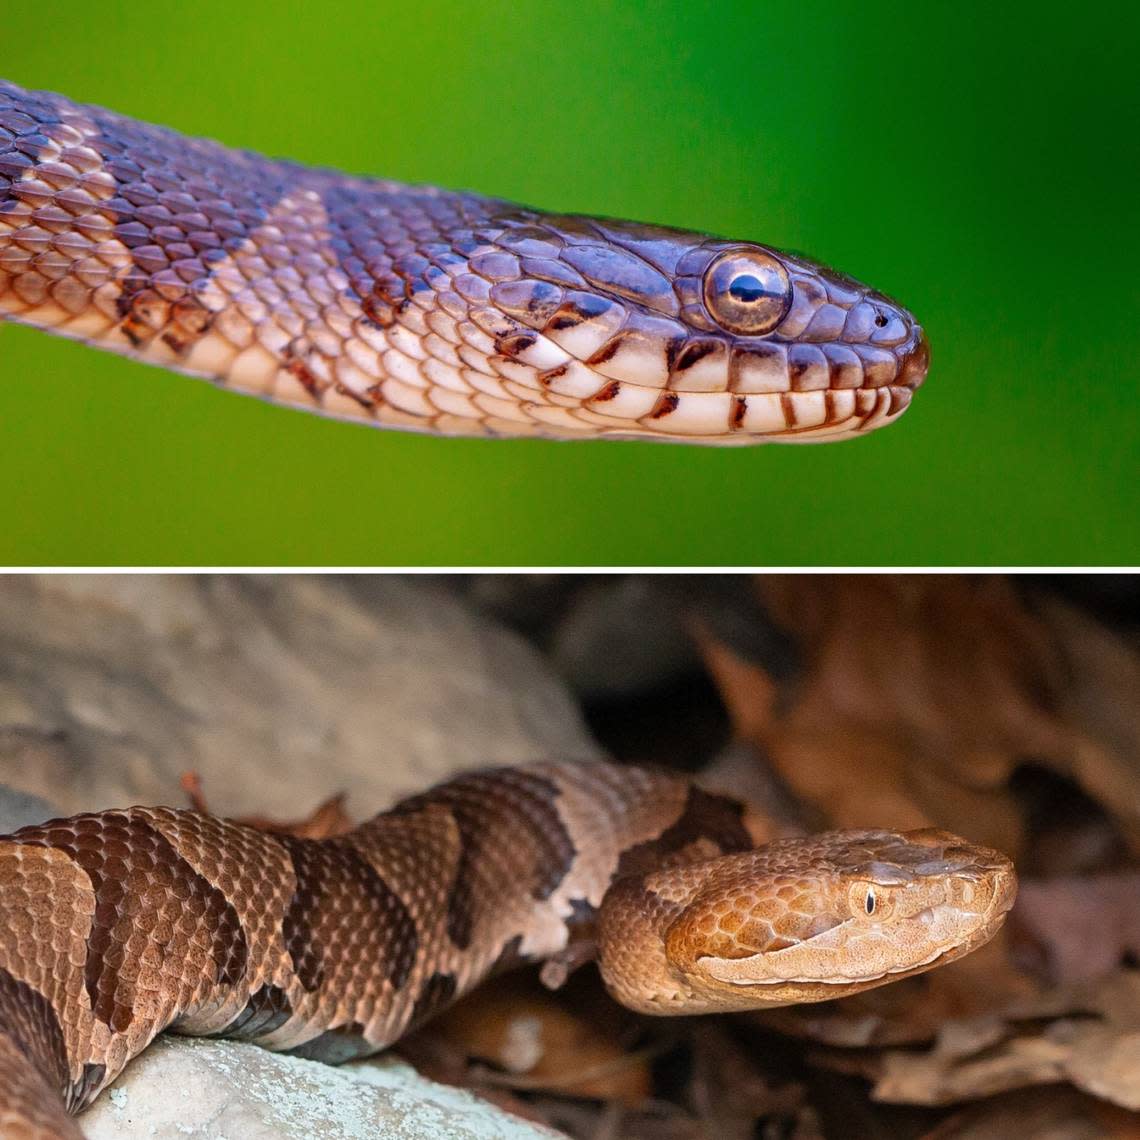 On top, the scales on a watersnake with the dark spots being widest on top. The bottom photo shows the hourglass-shaped pattern of Copperhead snakes.